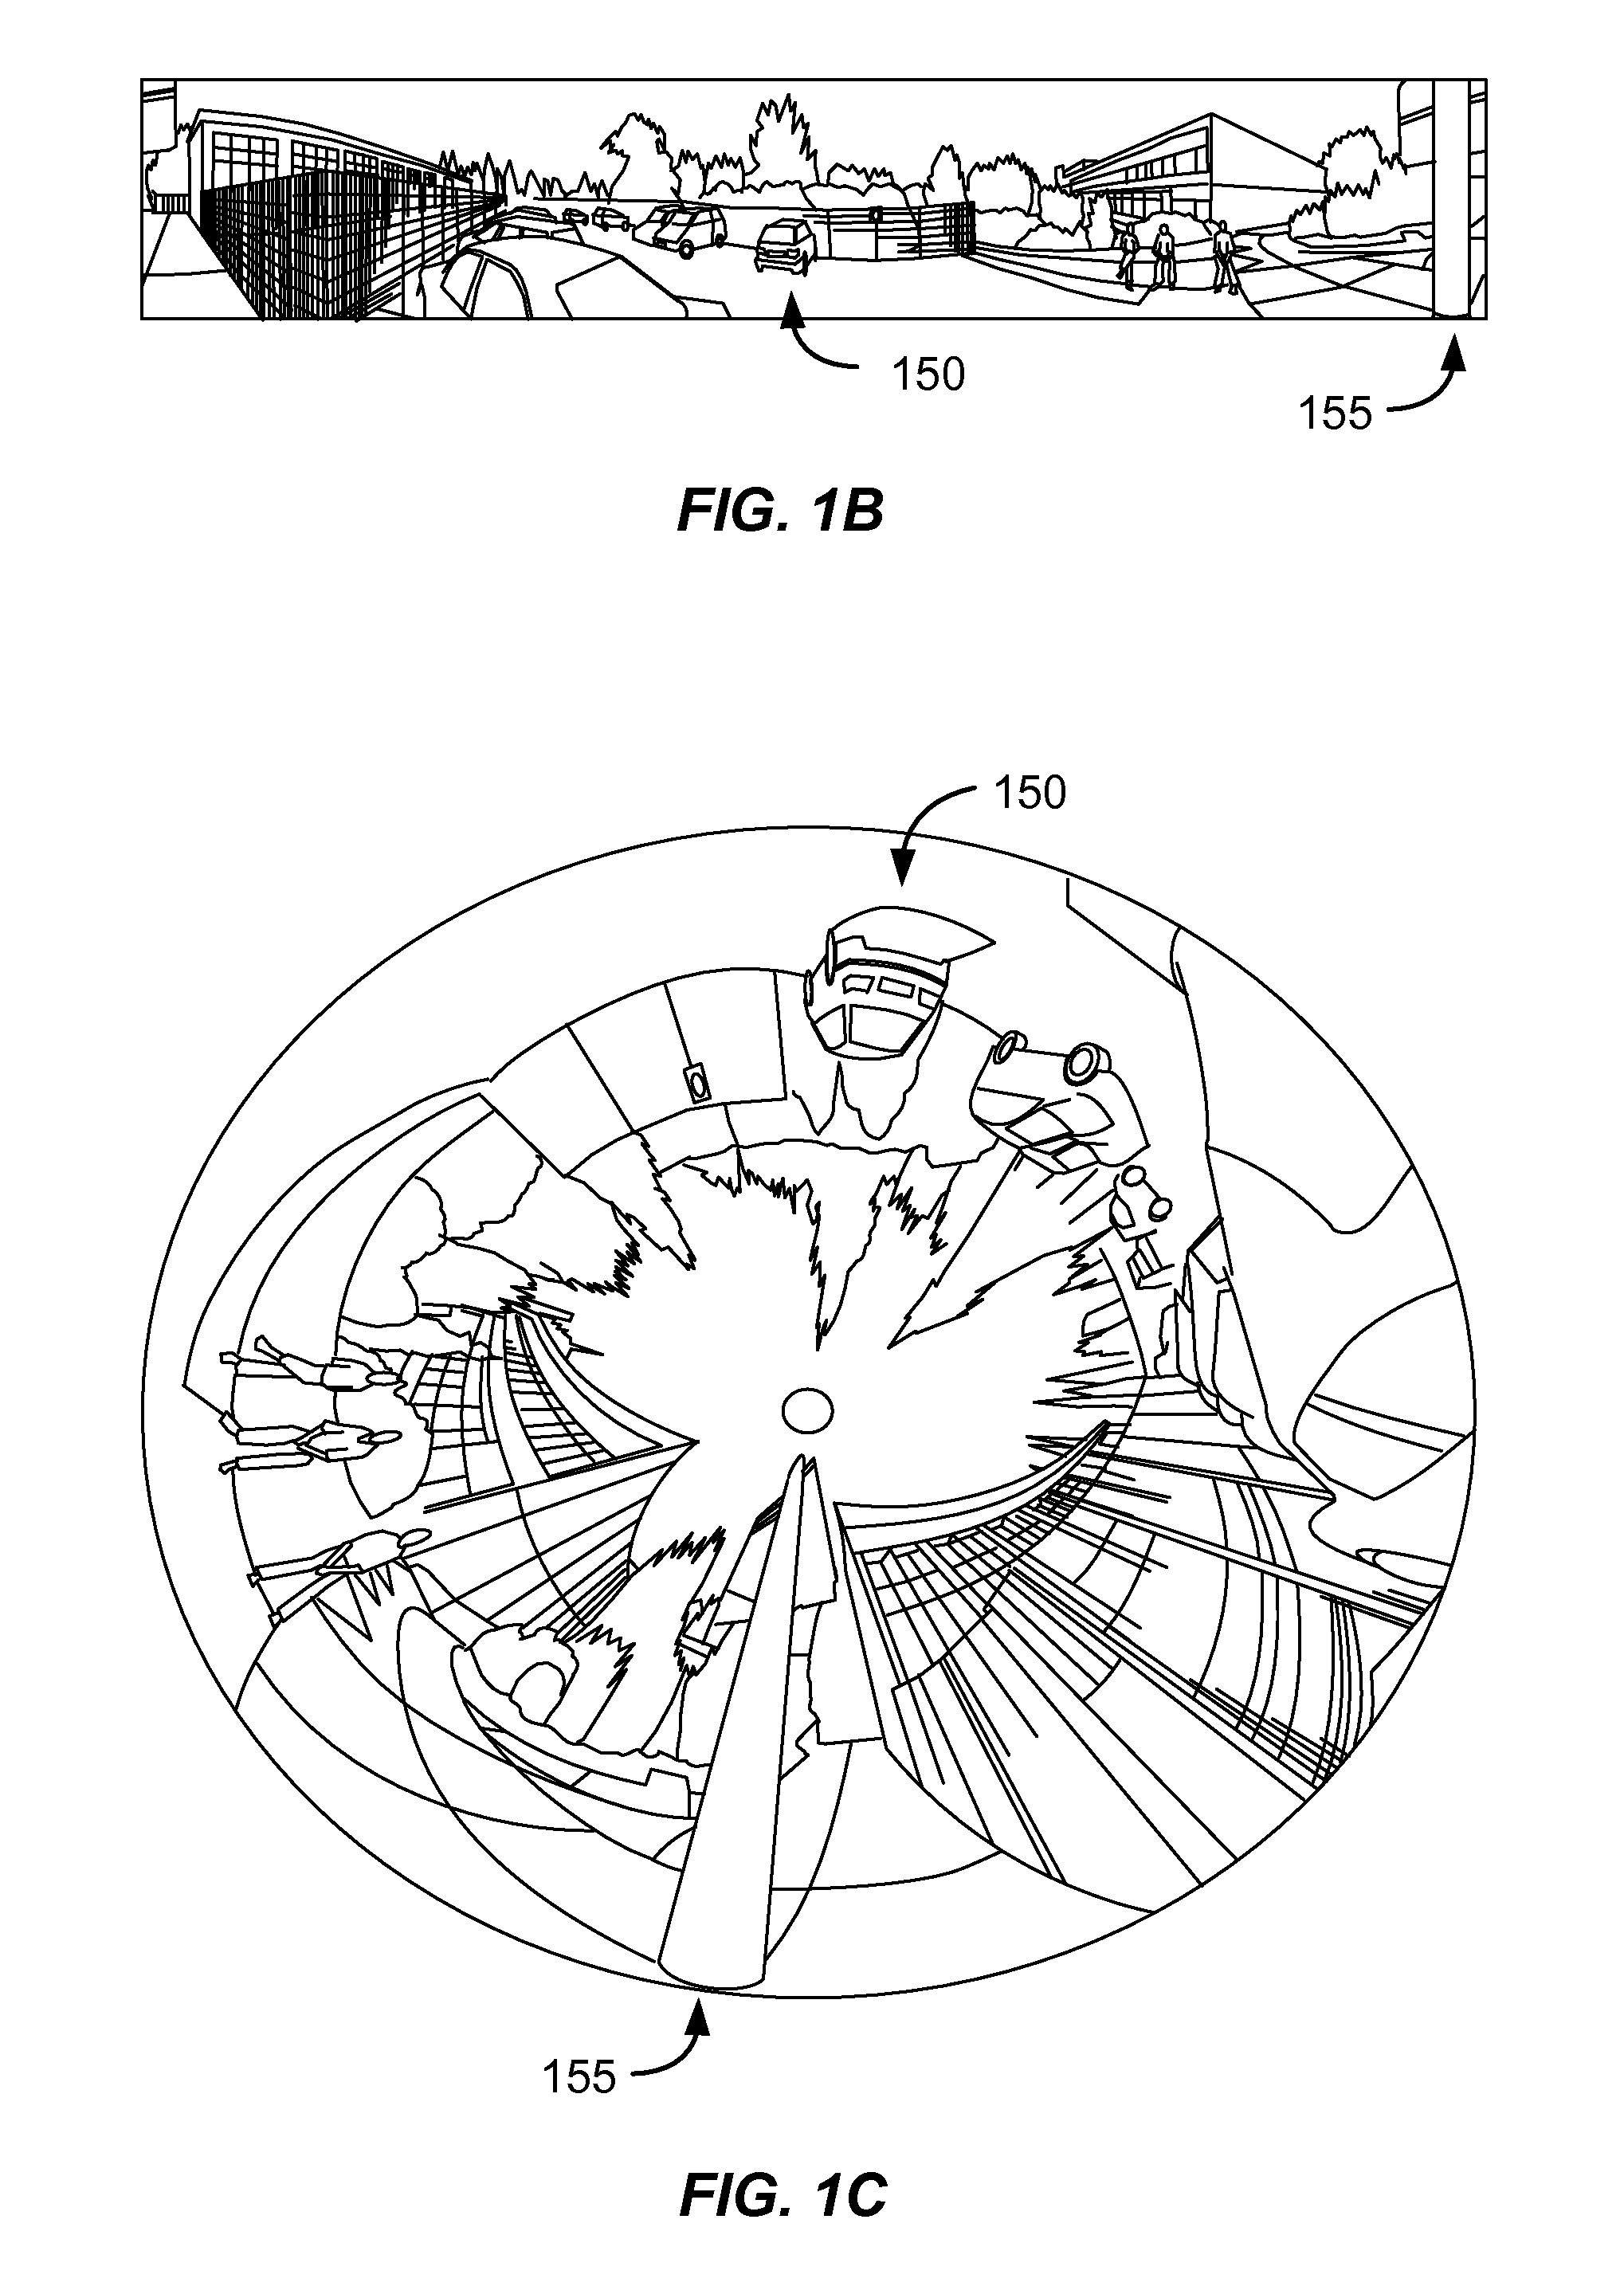 Method and system for measuring angles based on 360 degree images